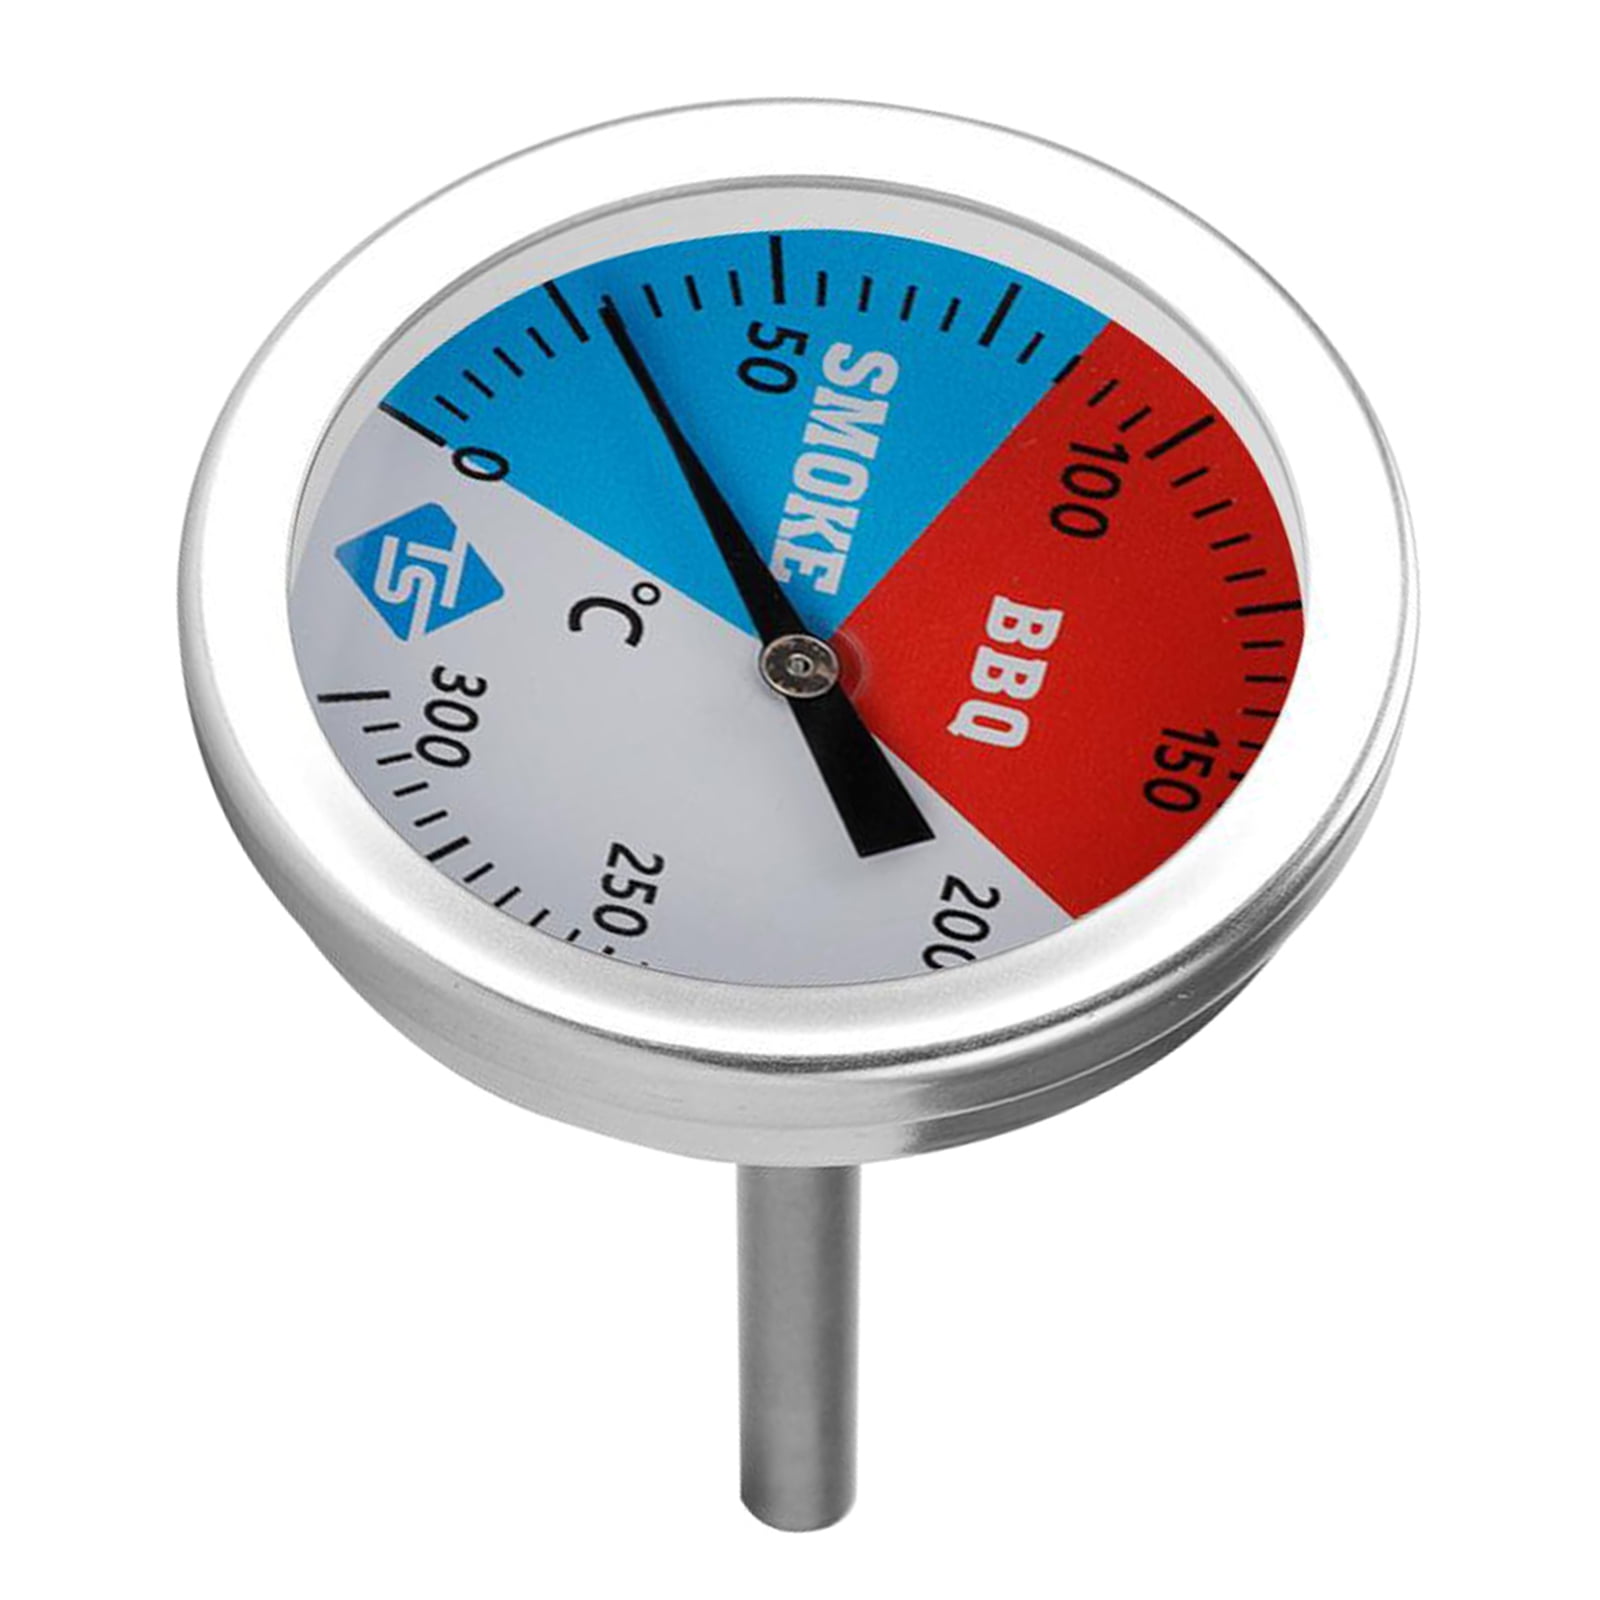 3" Stainless Steel BBQ Smoker Grill Thermometer Oven Temperature Gauge 